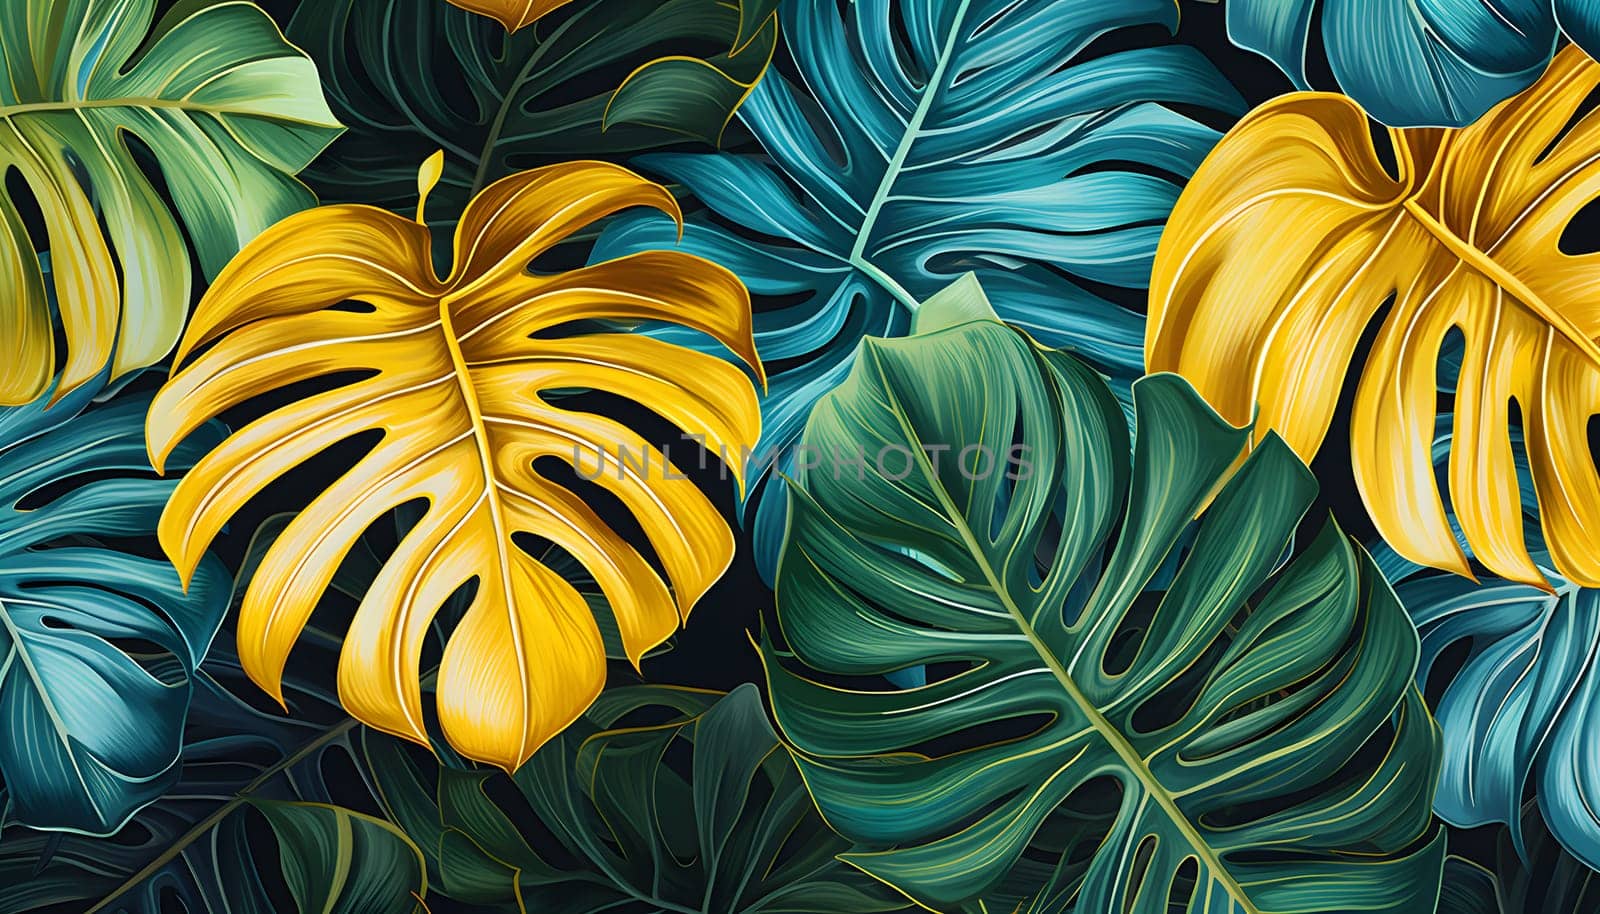 Vibrant Yellow and Green Leaves Painting on Black Background by Nadtochiy